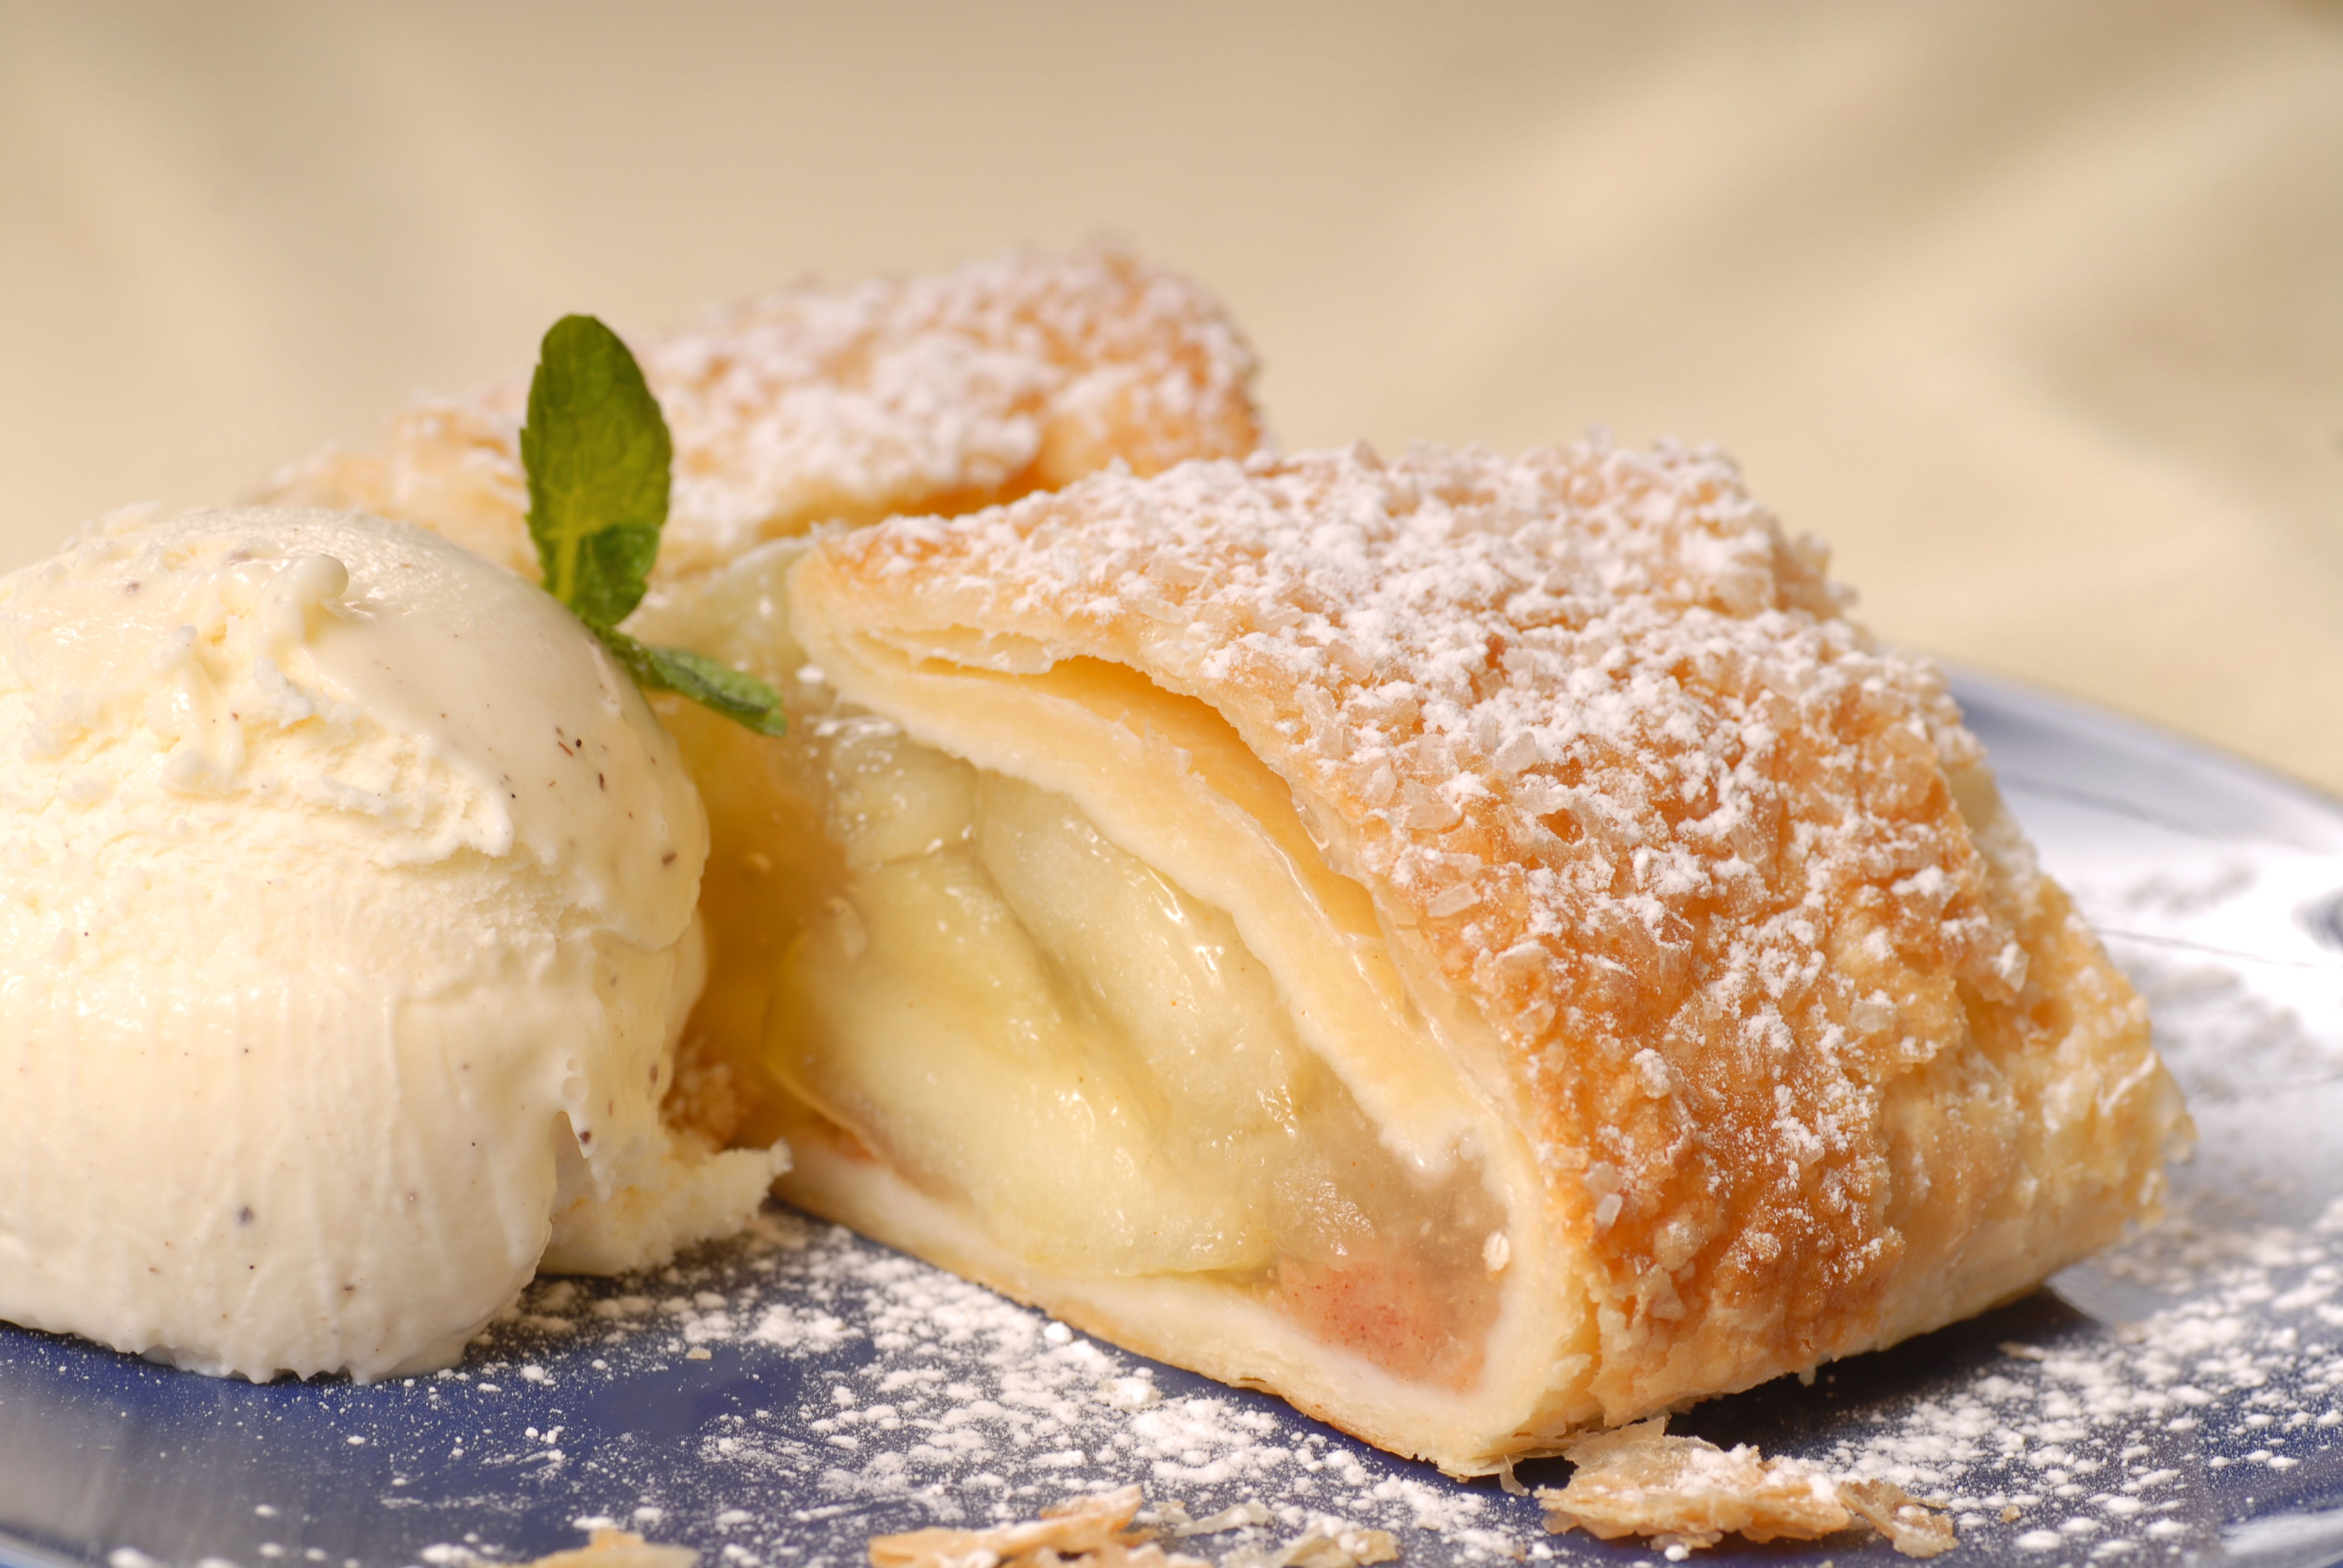 Amazing Foods to Try During a River Cruise in Germany - Apfelstrudel